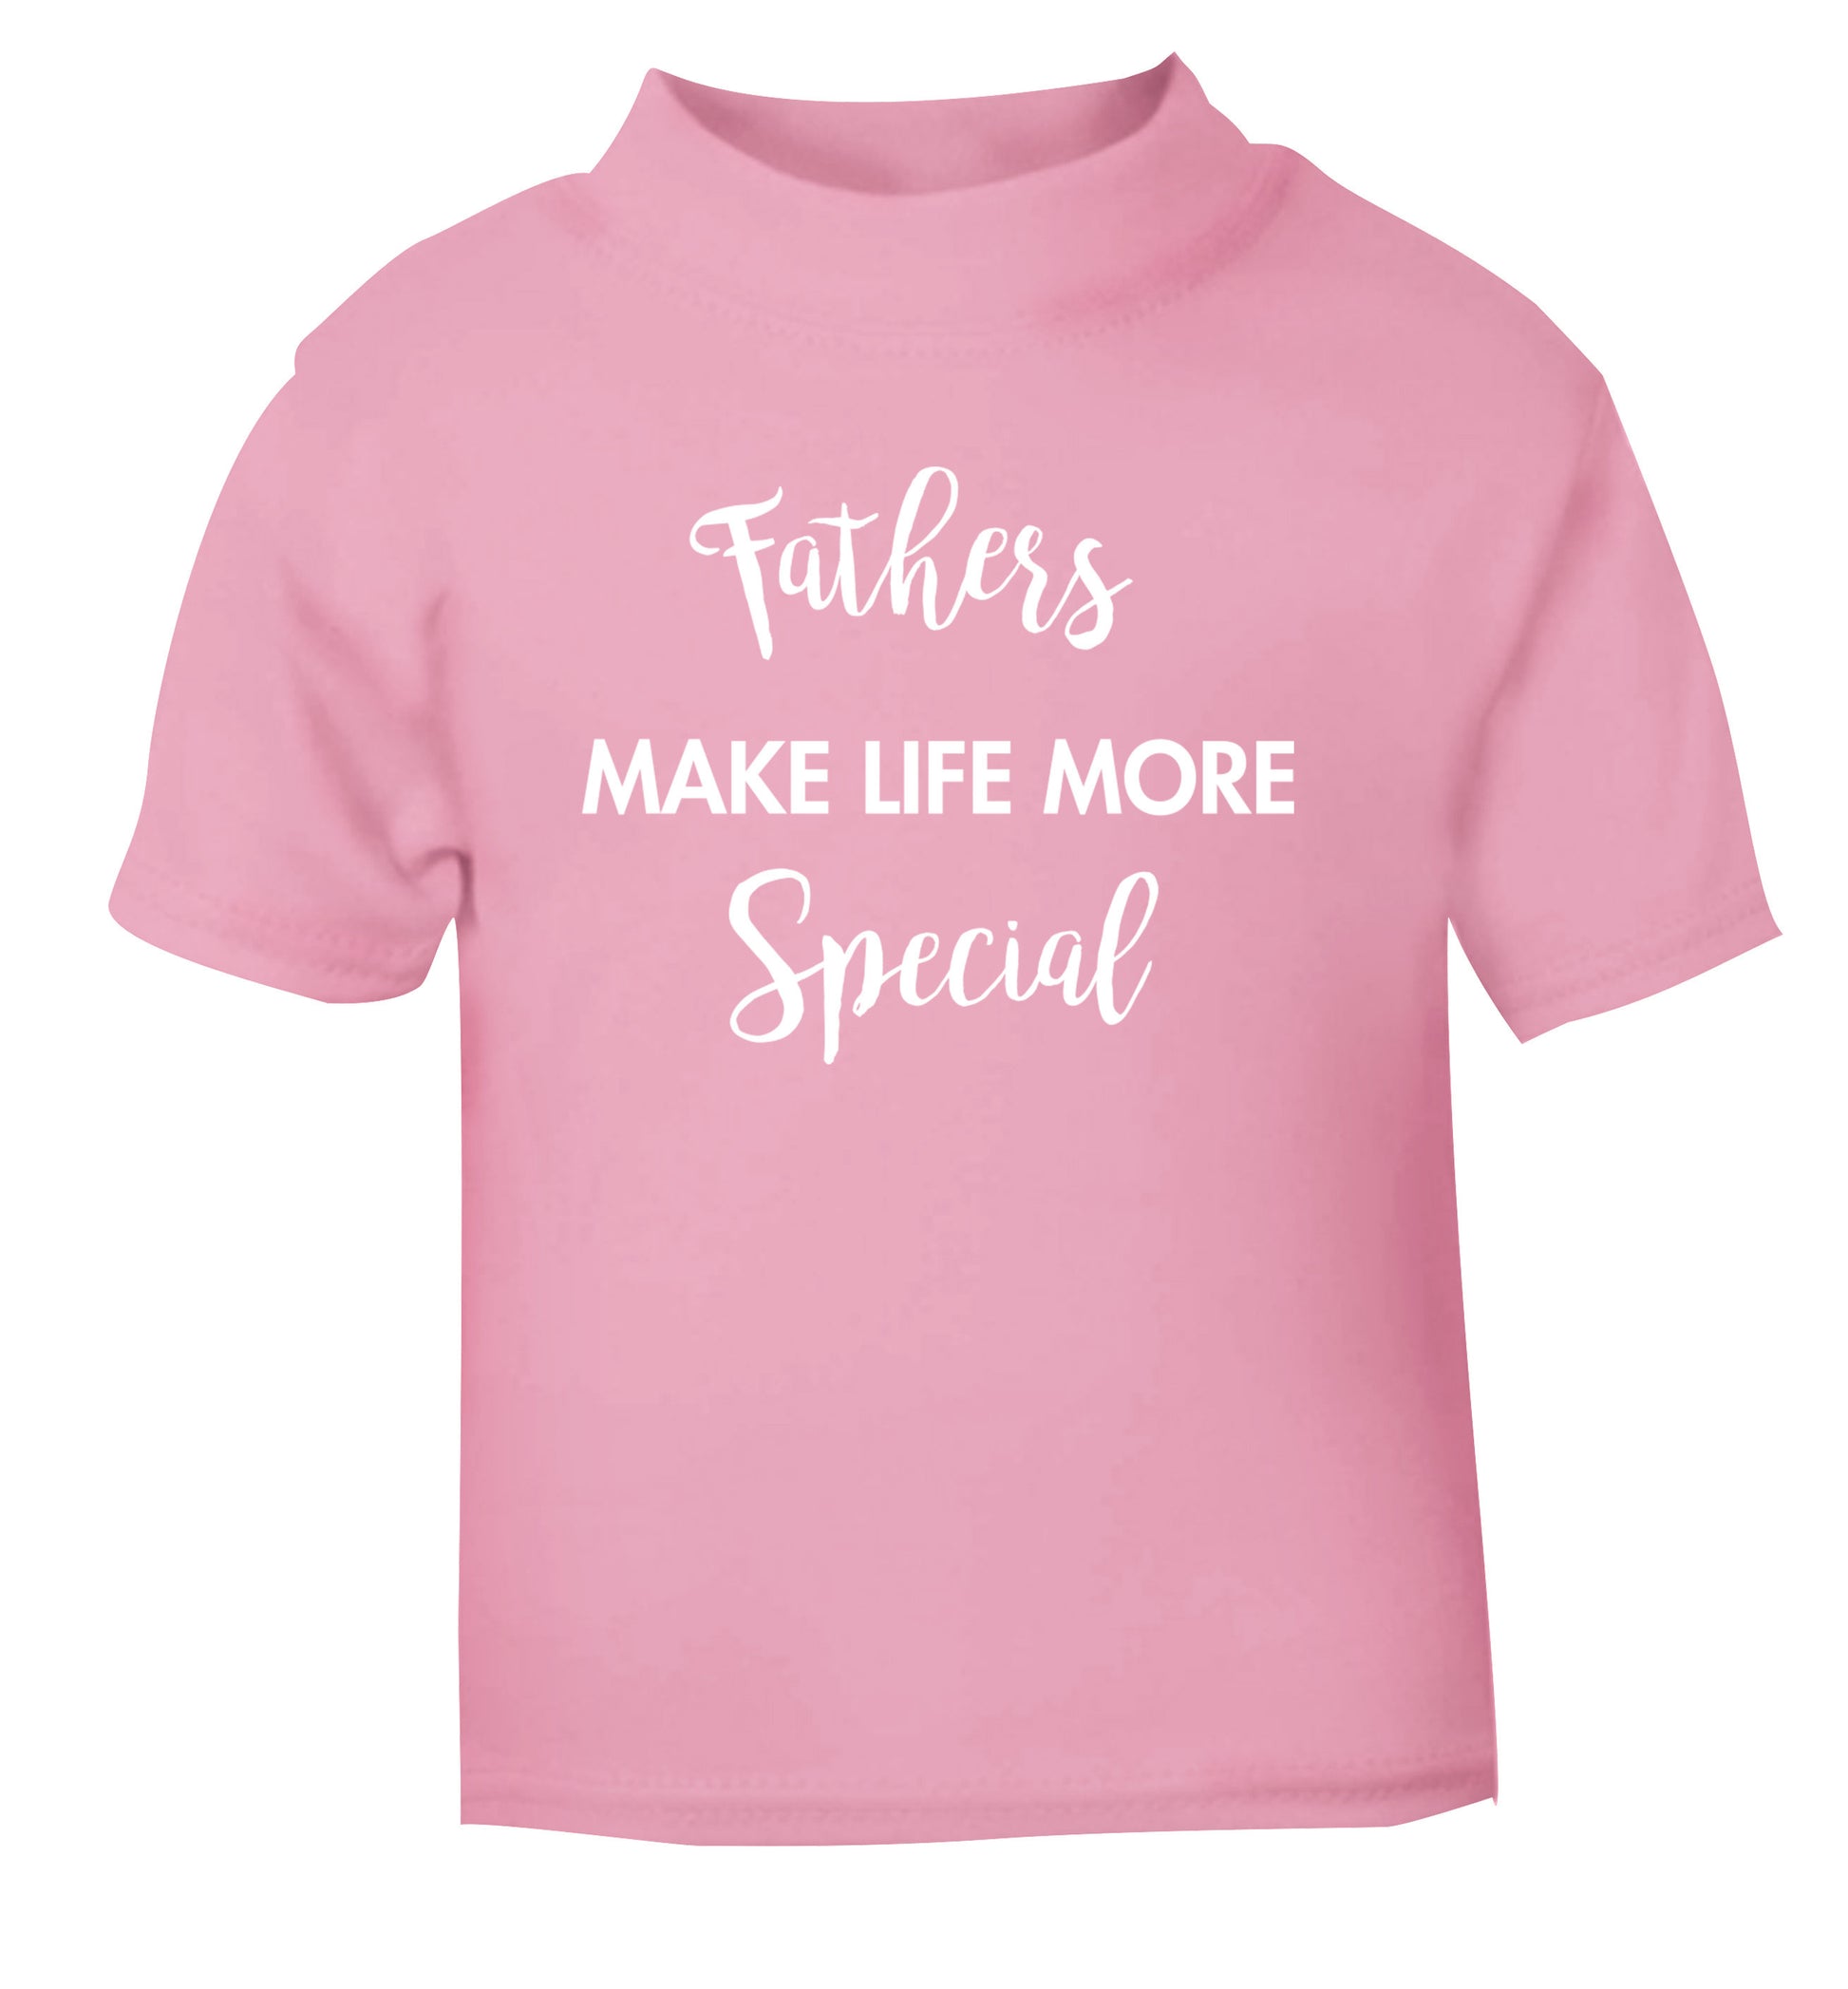 Fathers make life more special light pink Baby Toddler Tshirt 2 Years